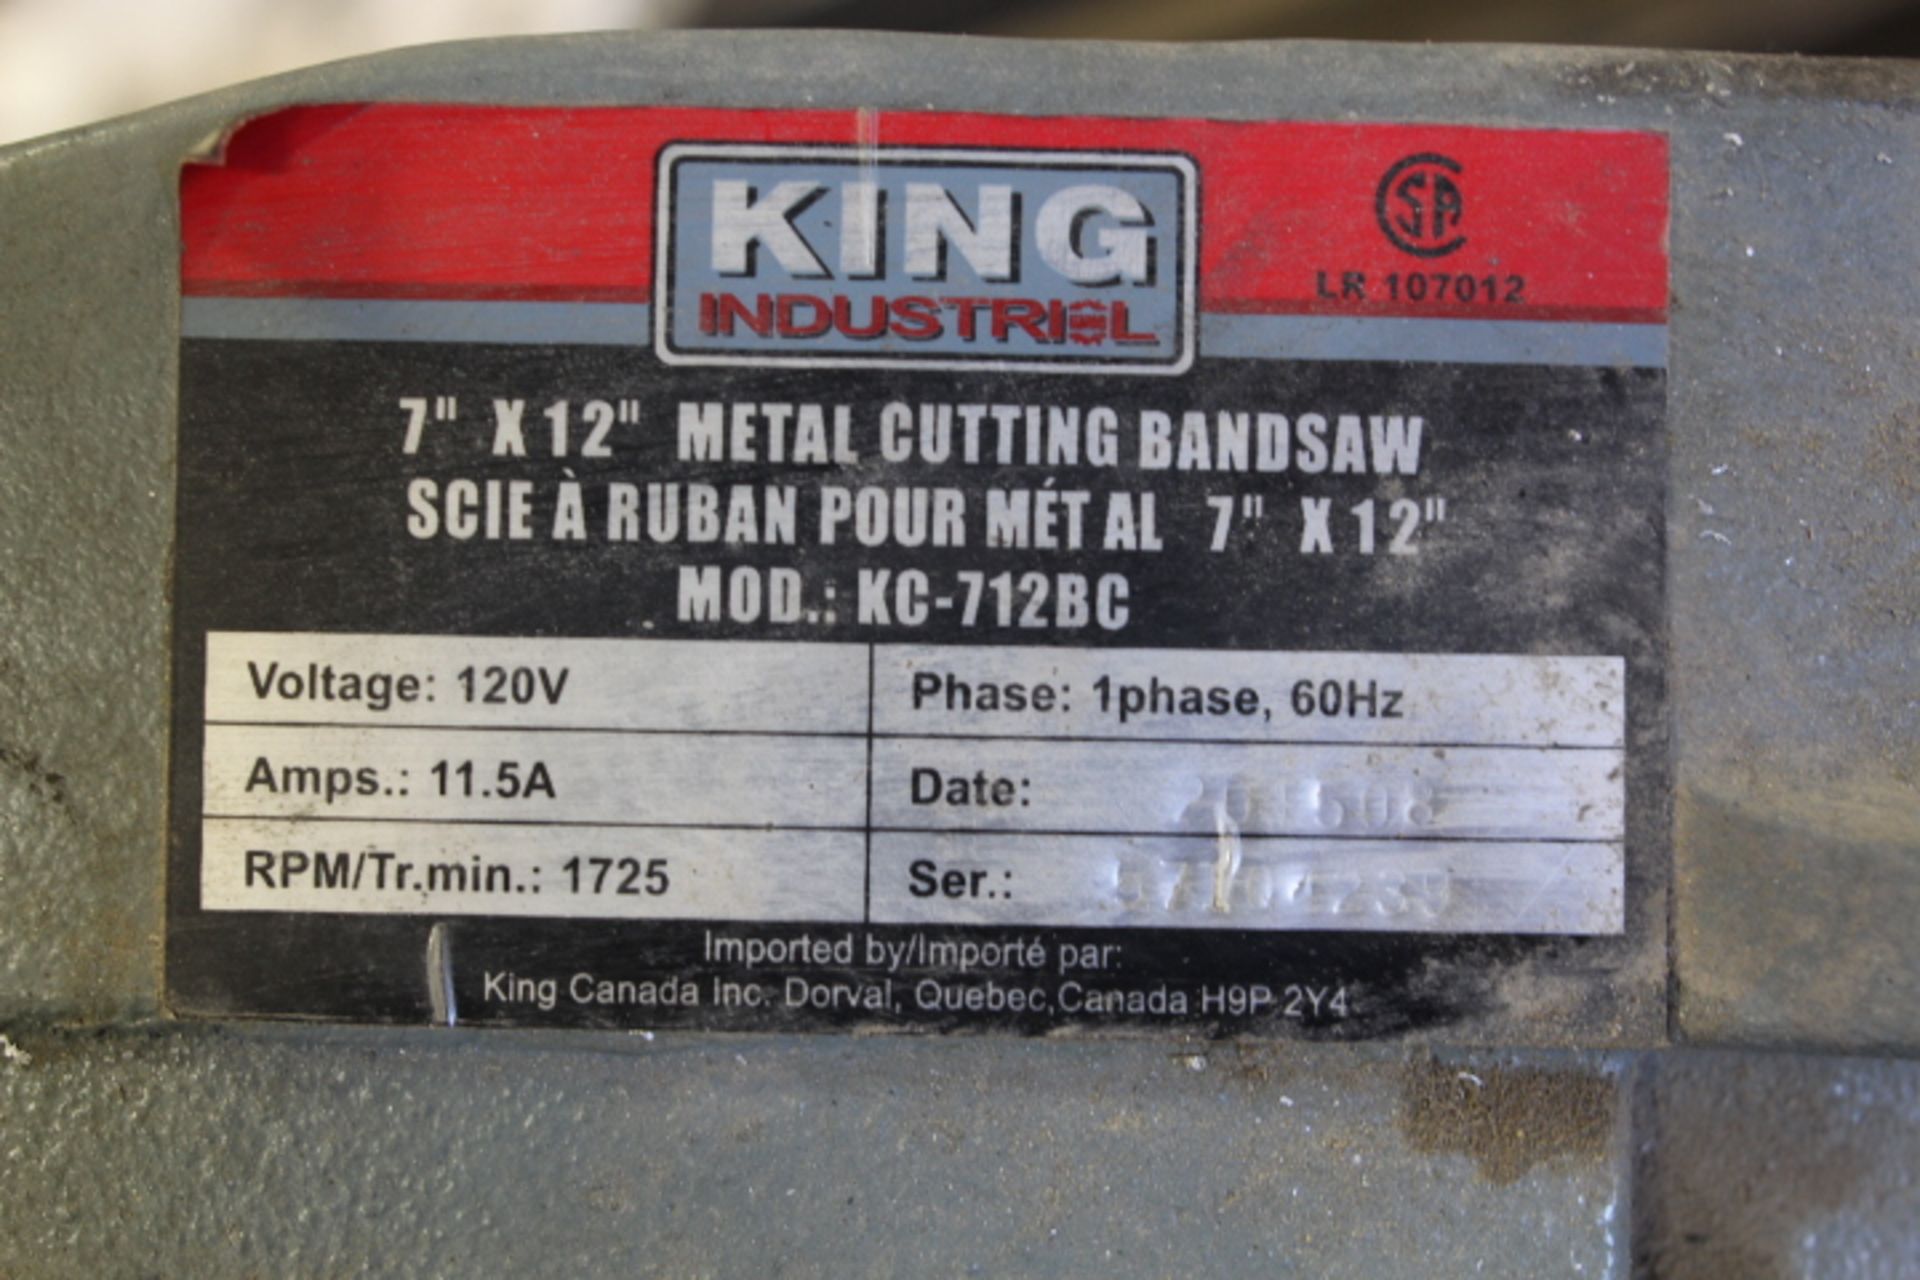 King Industrial Metal Cutting Band Saw 120 volt - Image 4 of 4